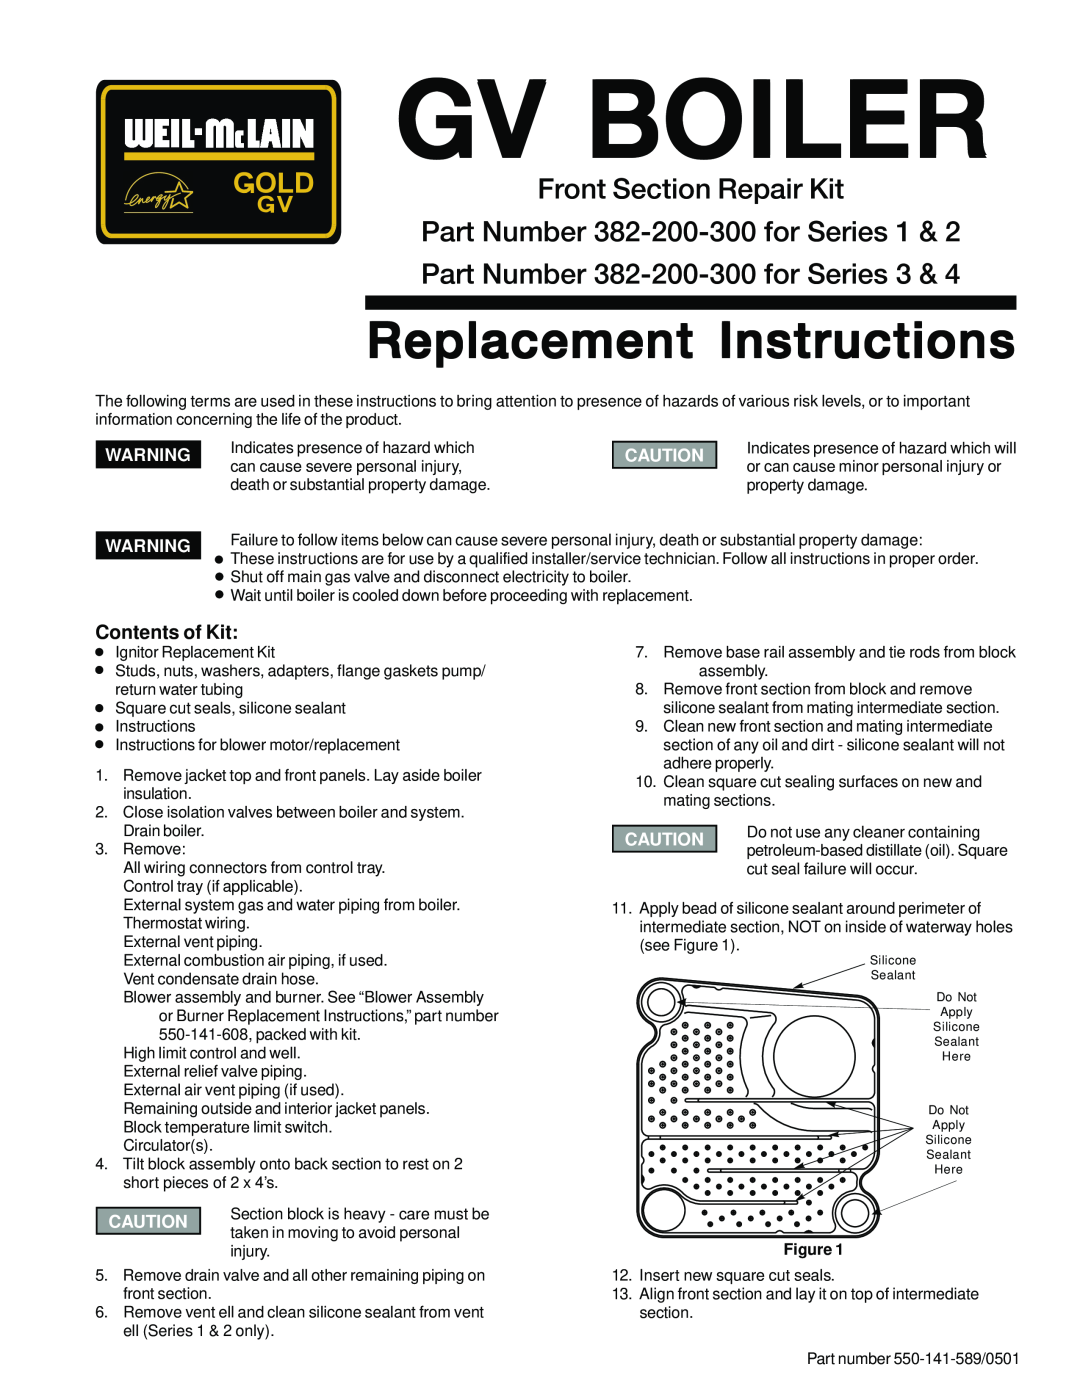 Weil-McLain GV Boiler manual Gv Boiler, Replacement Instructions, Front Section Repair Kit, Contents of Kit 